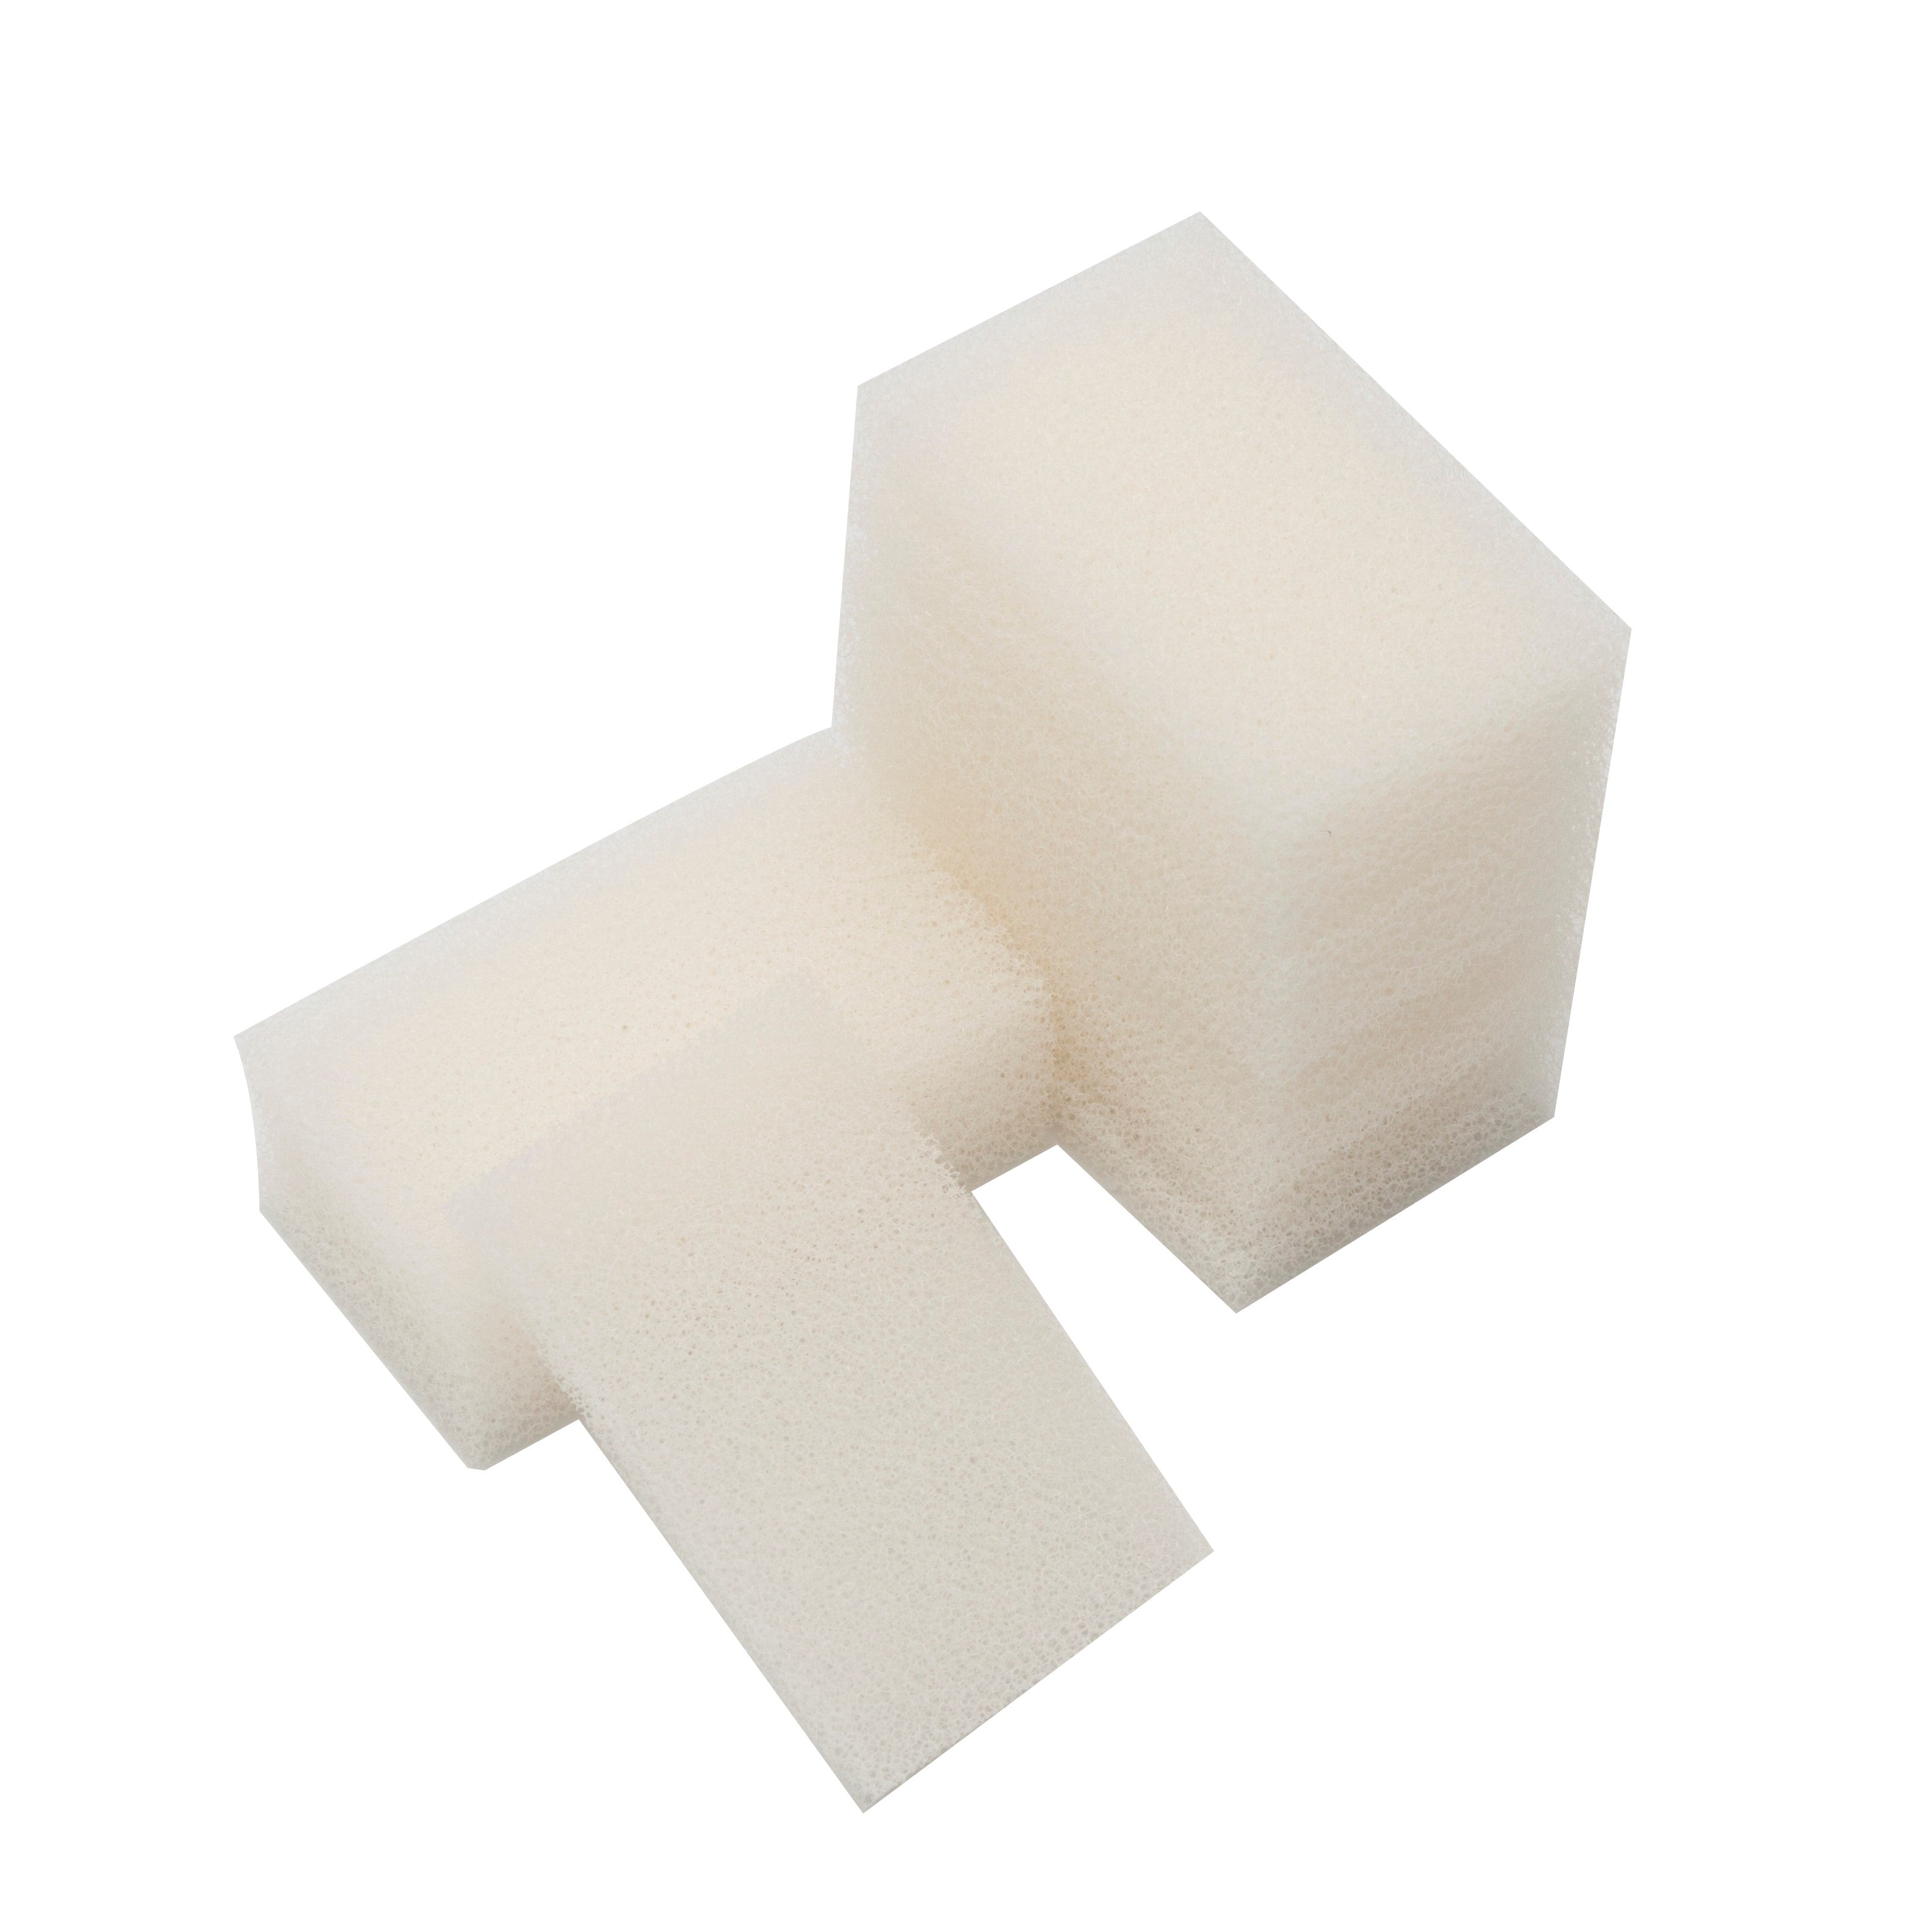 LTWHOME Compatible Foam Filters Suitable for Interpet Pf1 Internal Filter(Pack of 50)